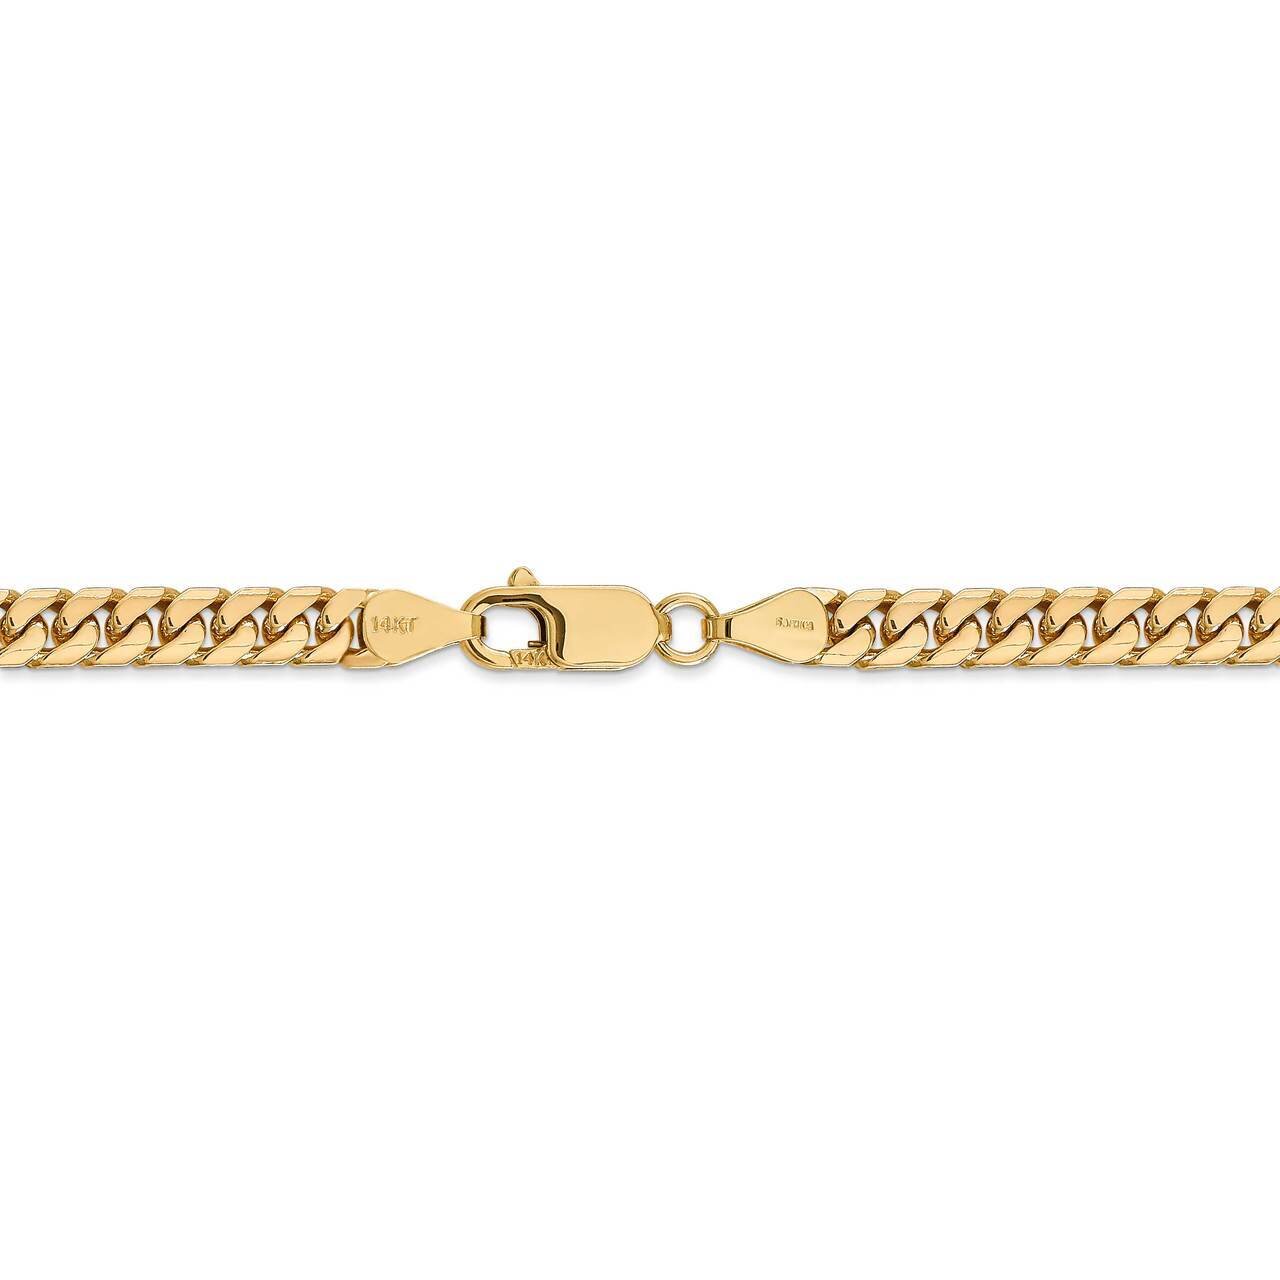 22 Inch 5mm Solid Miami Cuban Chain 14k Yellow Gold DCU160-22